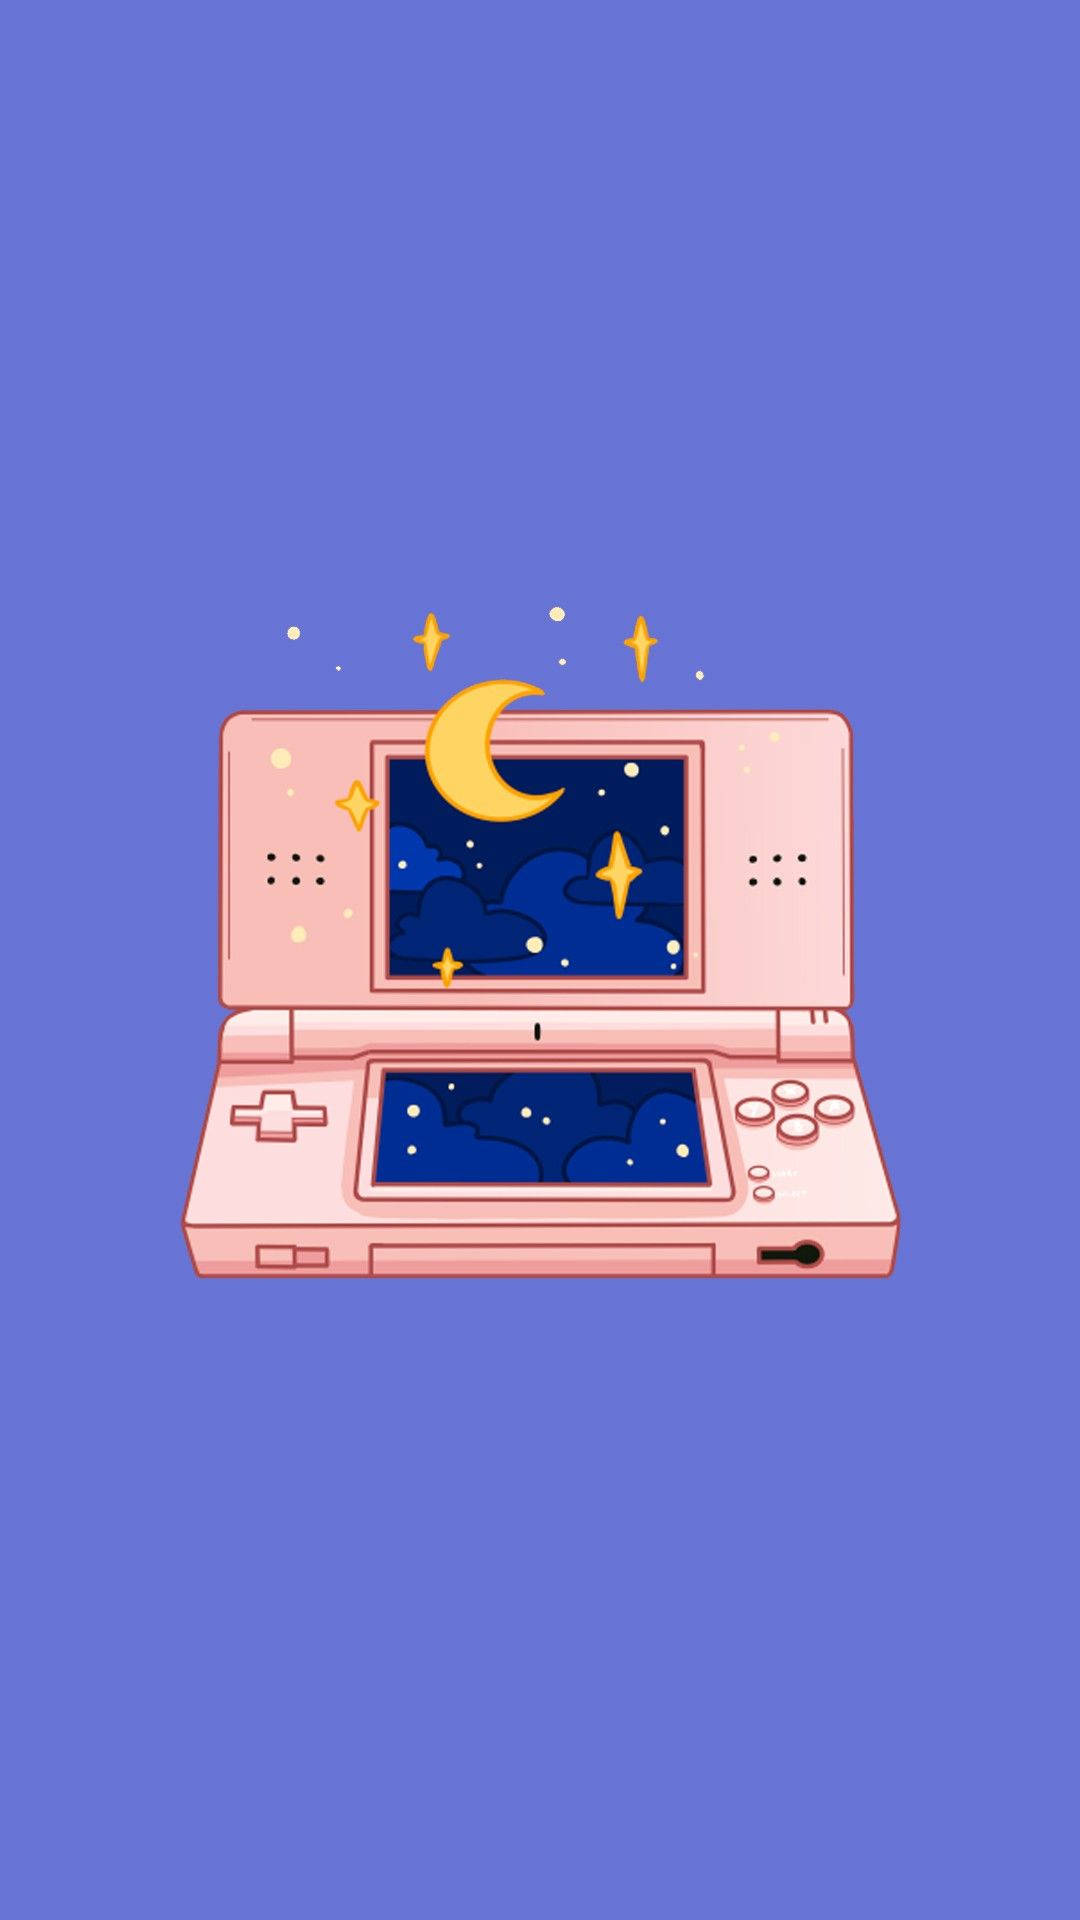 A Pink Nintendo Ds With A Moon And Stars Wallpaper